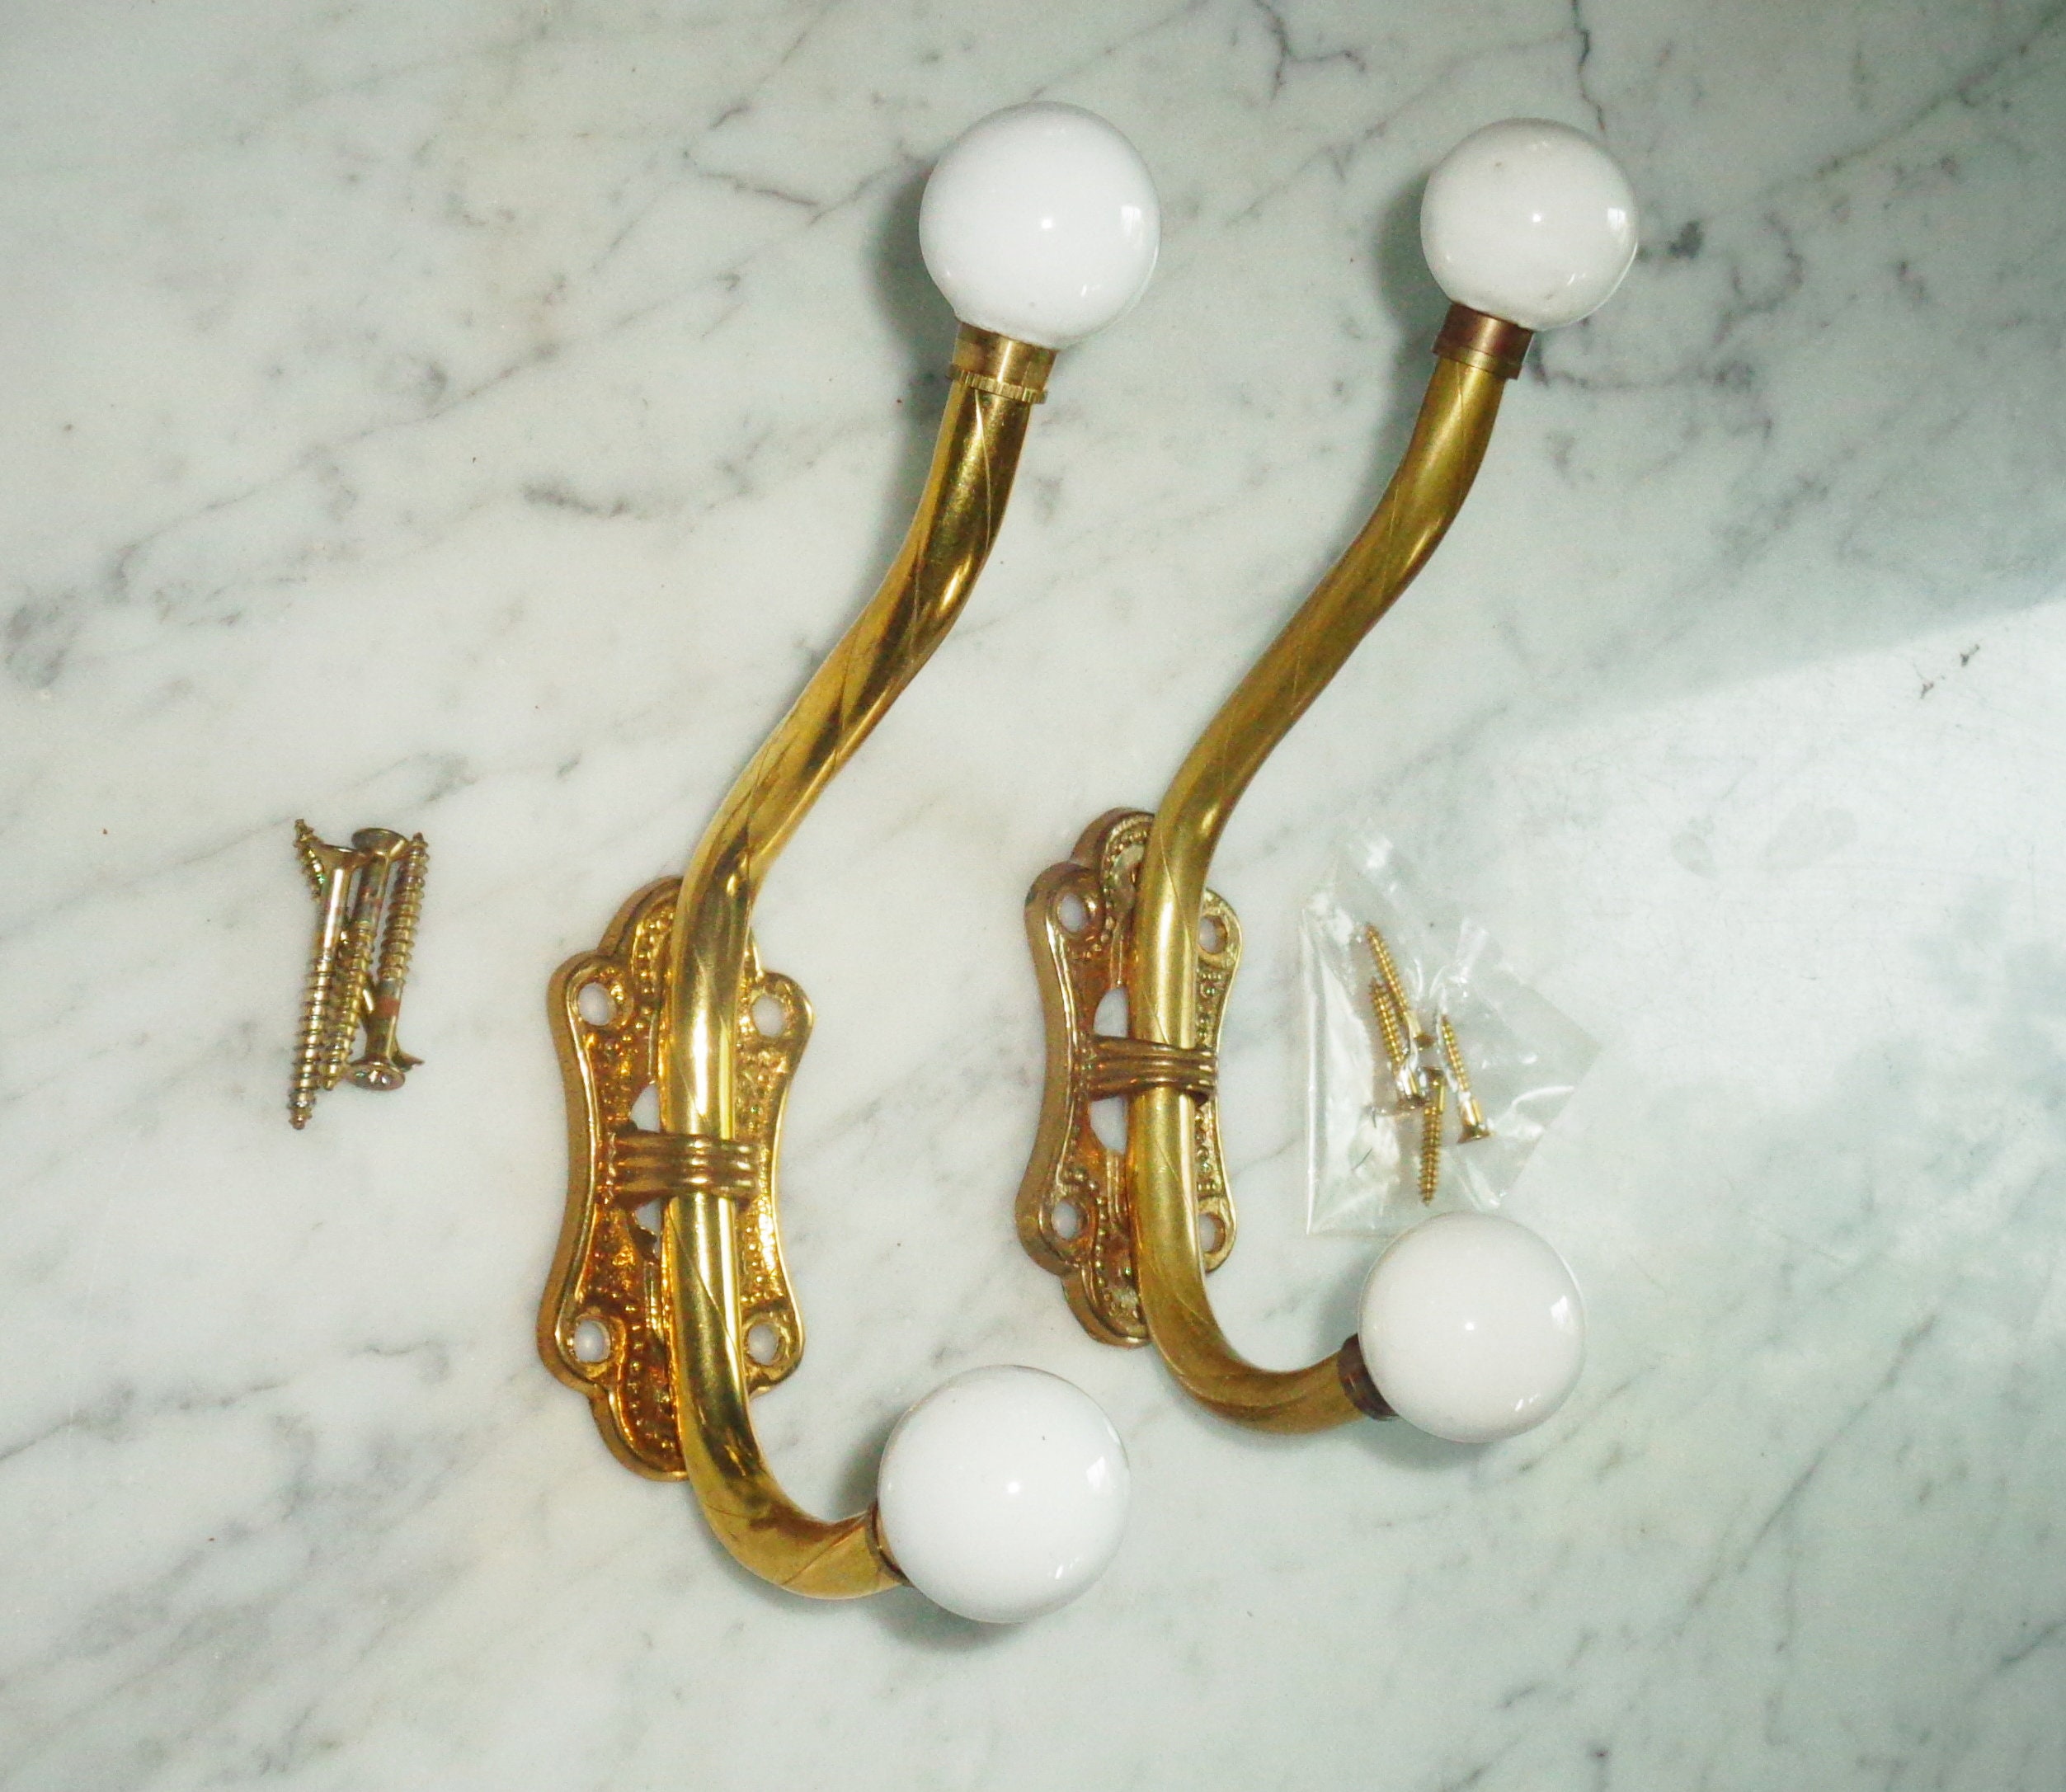 Brass Double Coat Hooks With Porcelain Ceramic Ball Tips Made in